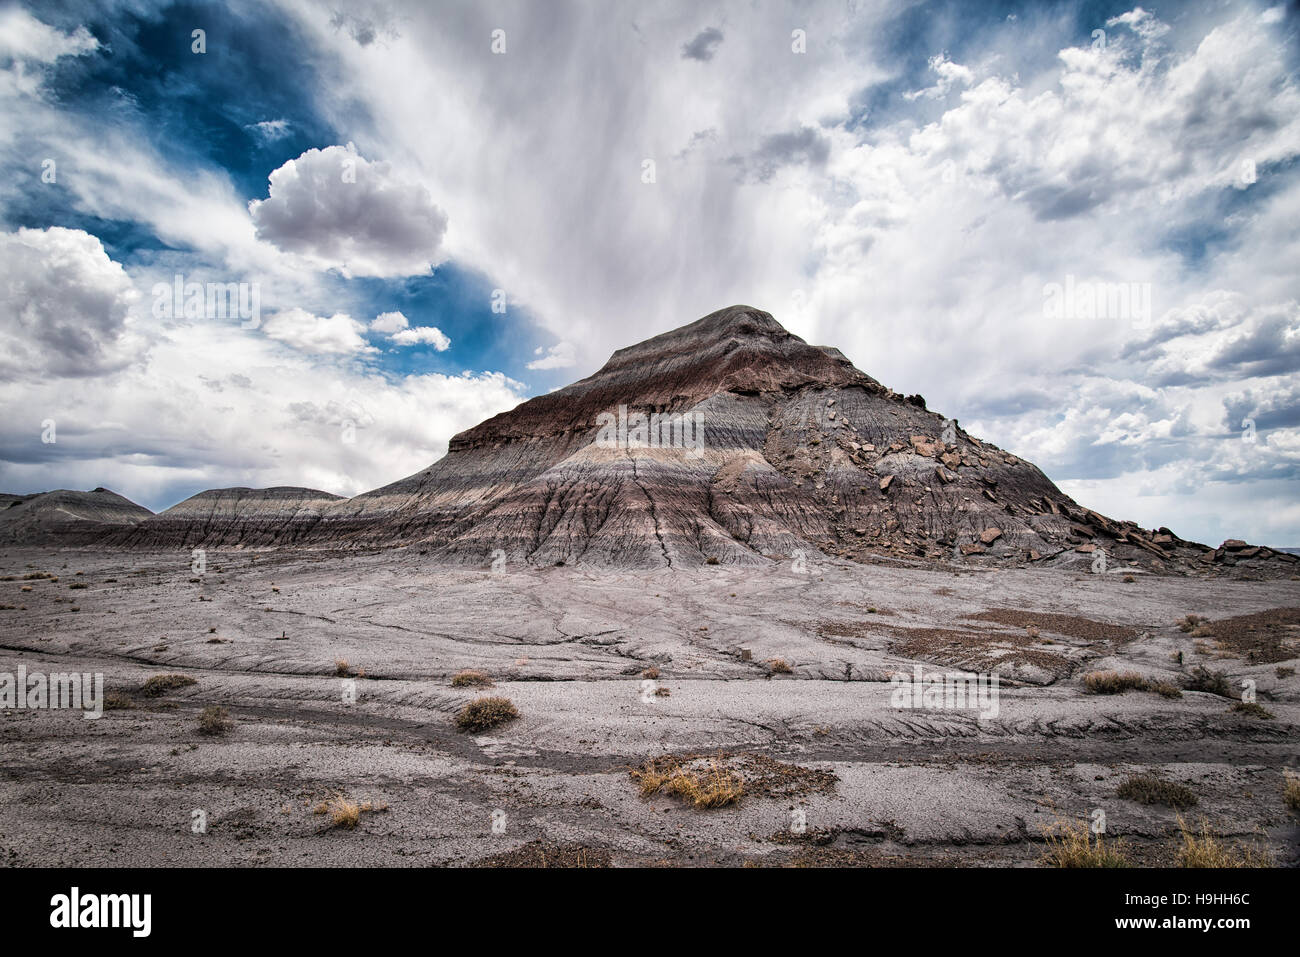 The Tepees  are 'famous' hills found along the drive in the Petrified Forest National Park Stock Photo